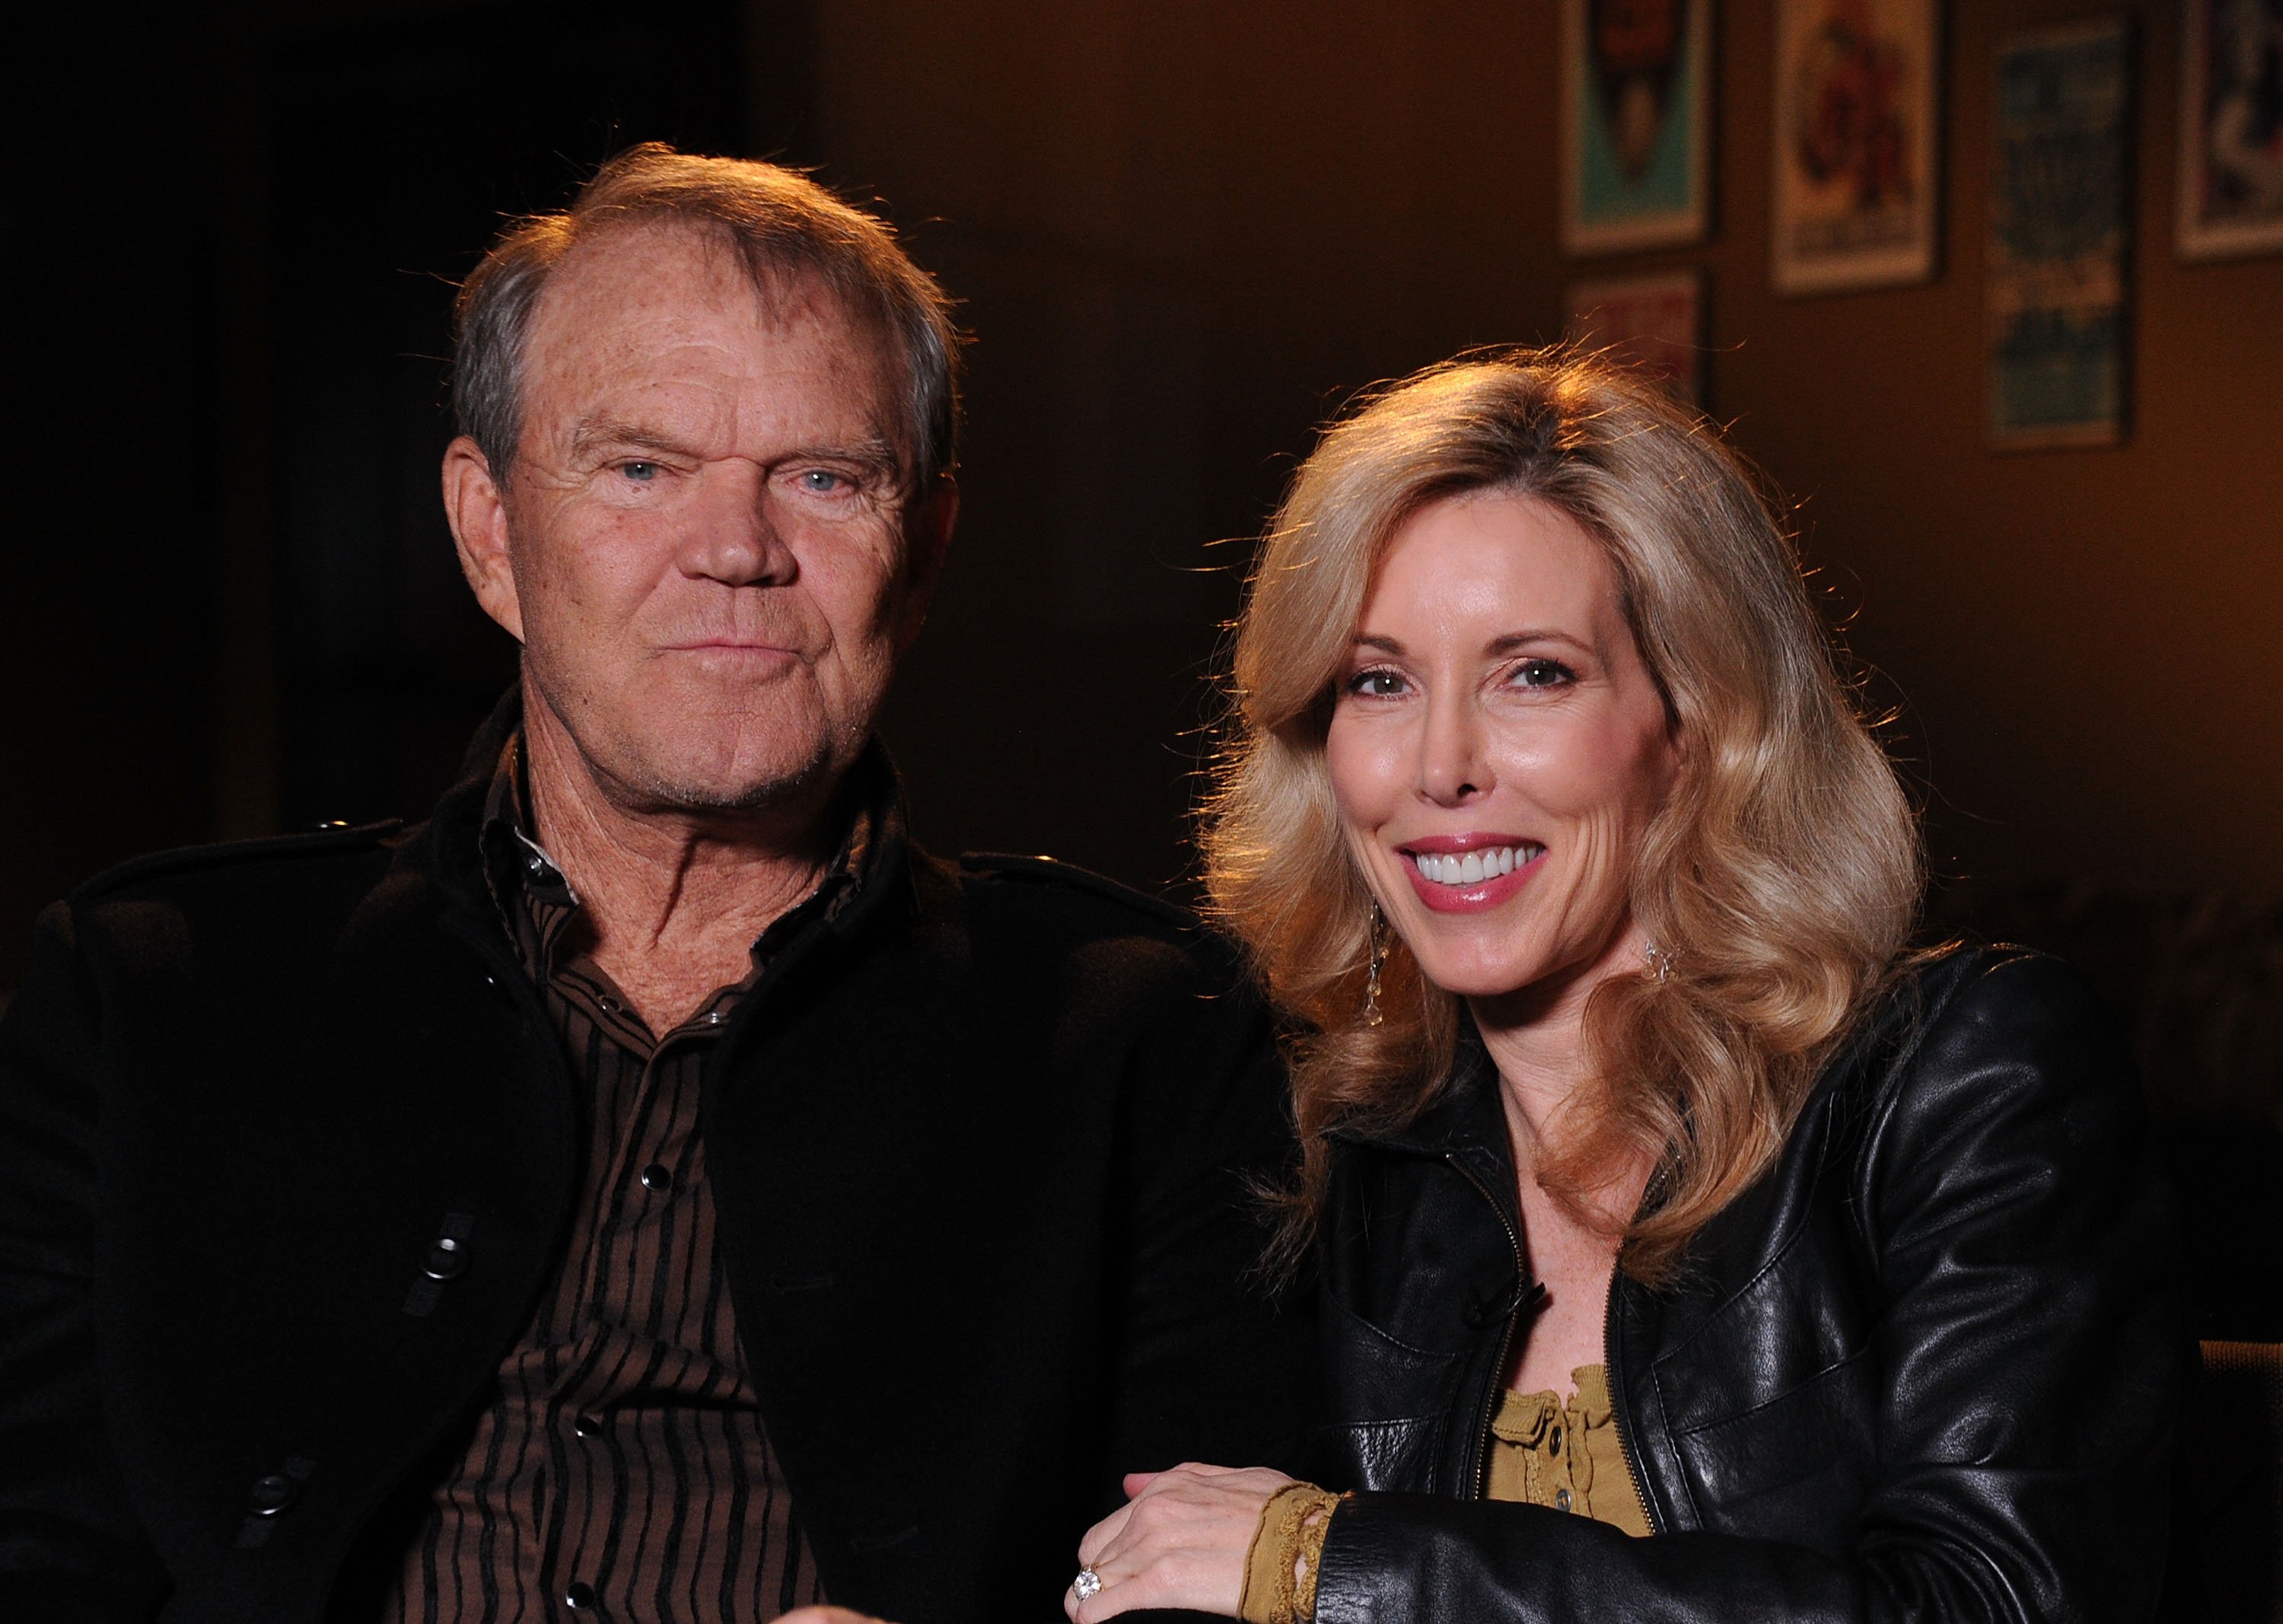 Glen Campbell and Kim Woollen in an interview with CMT on September 19, 2011. | Photo: Getty Images